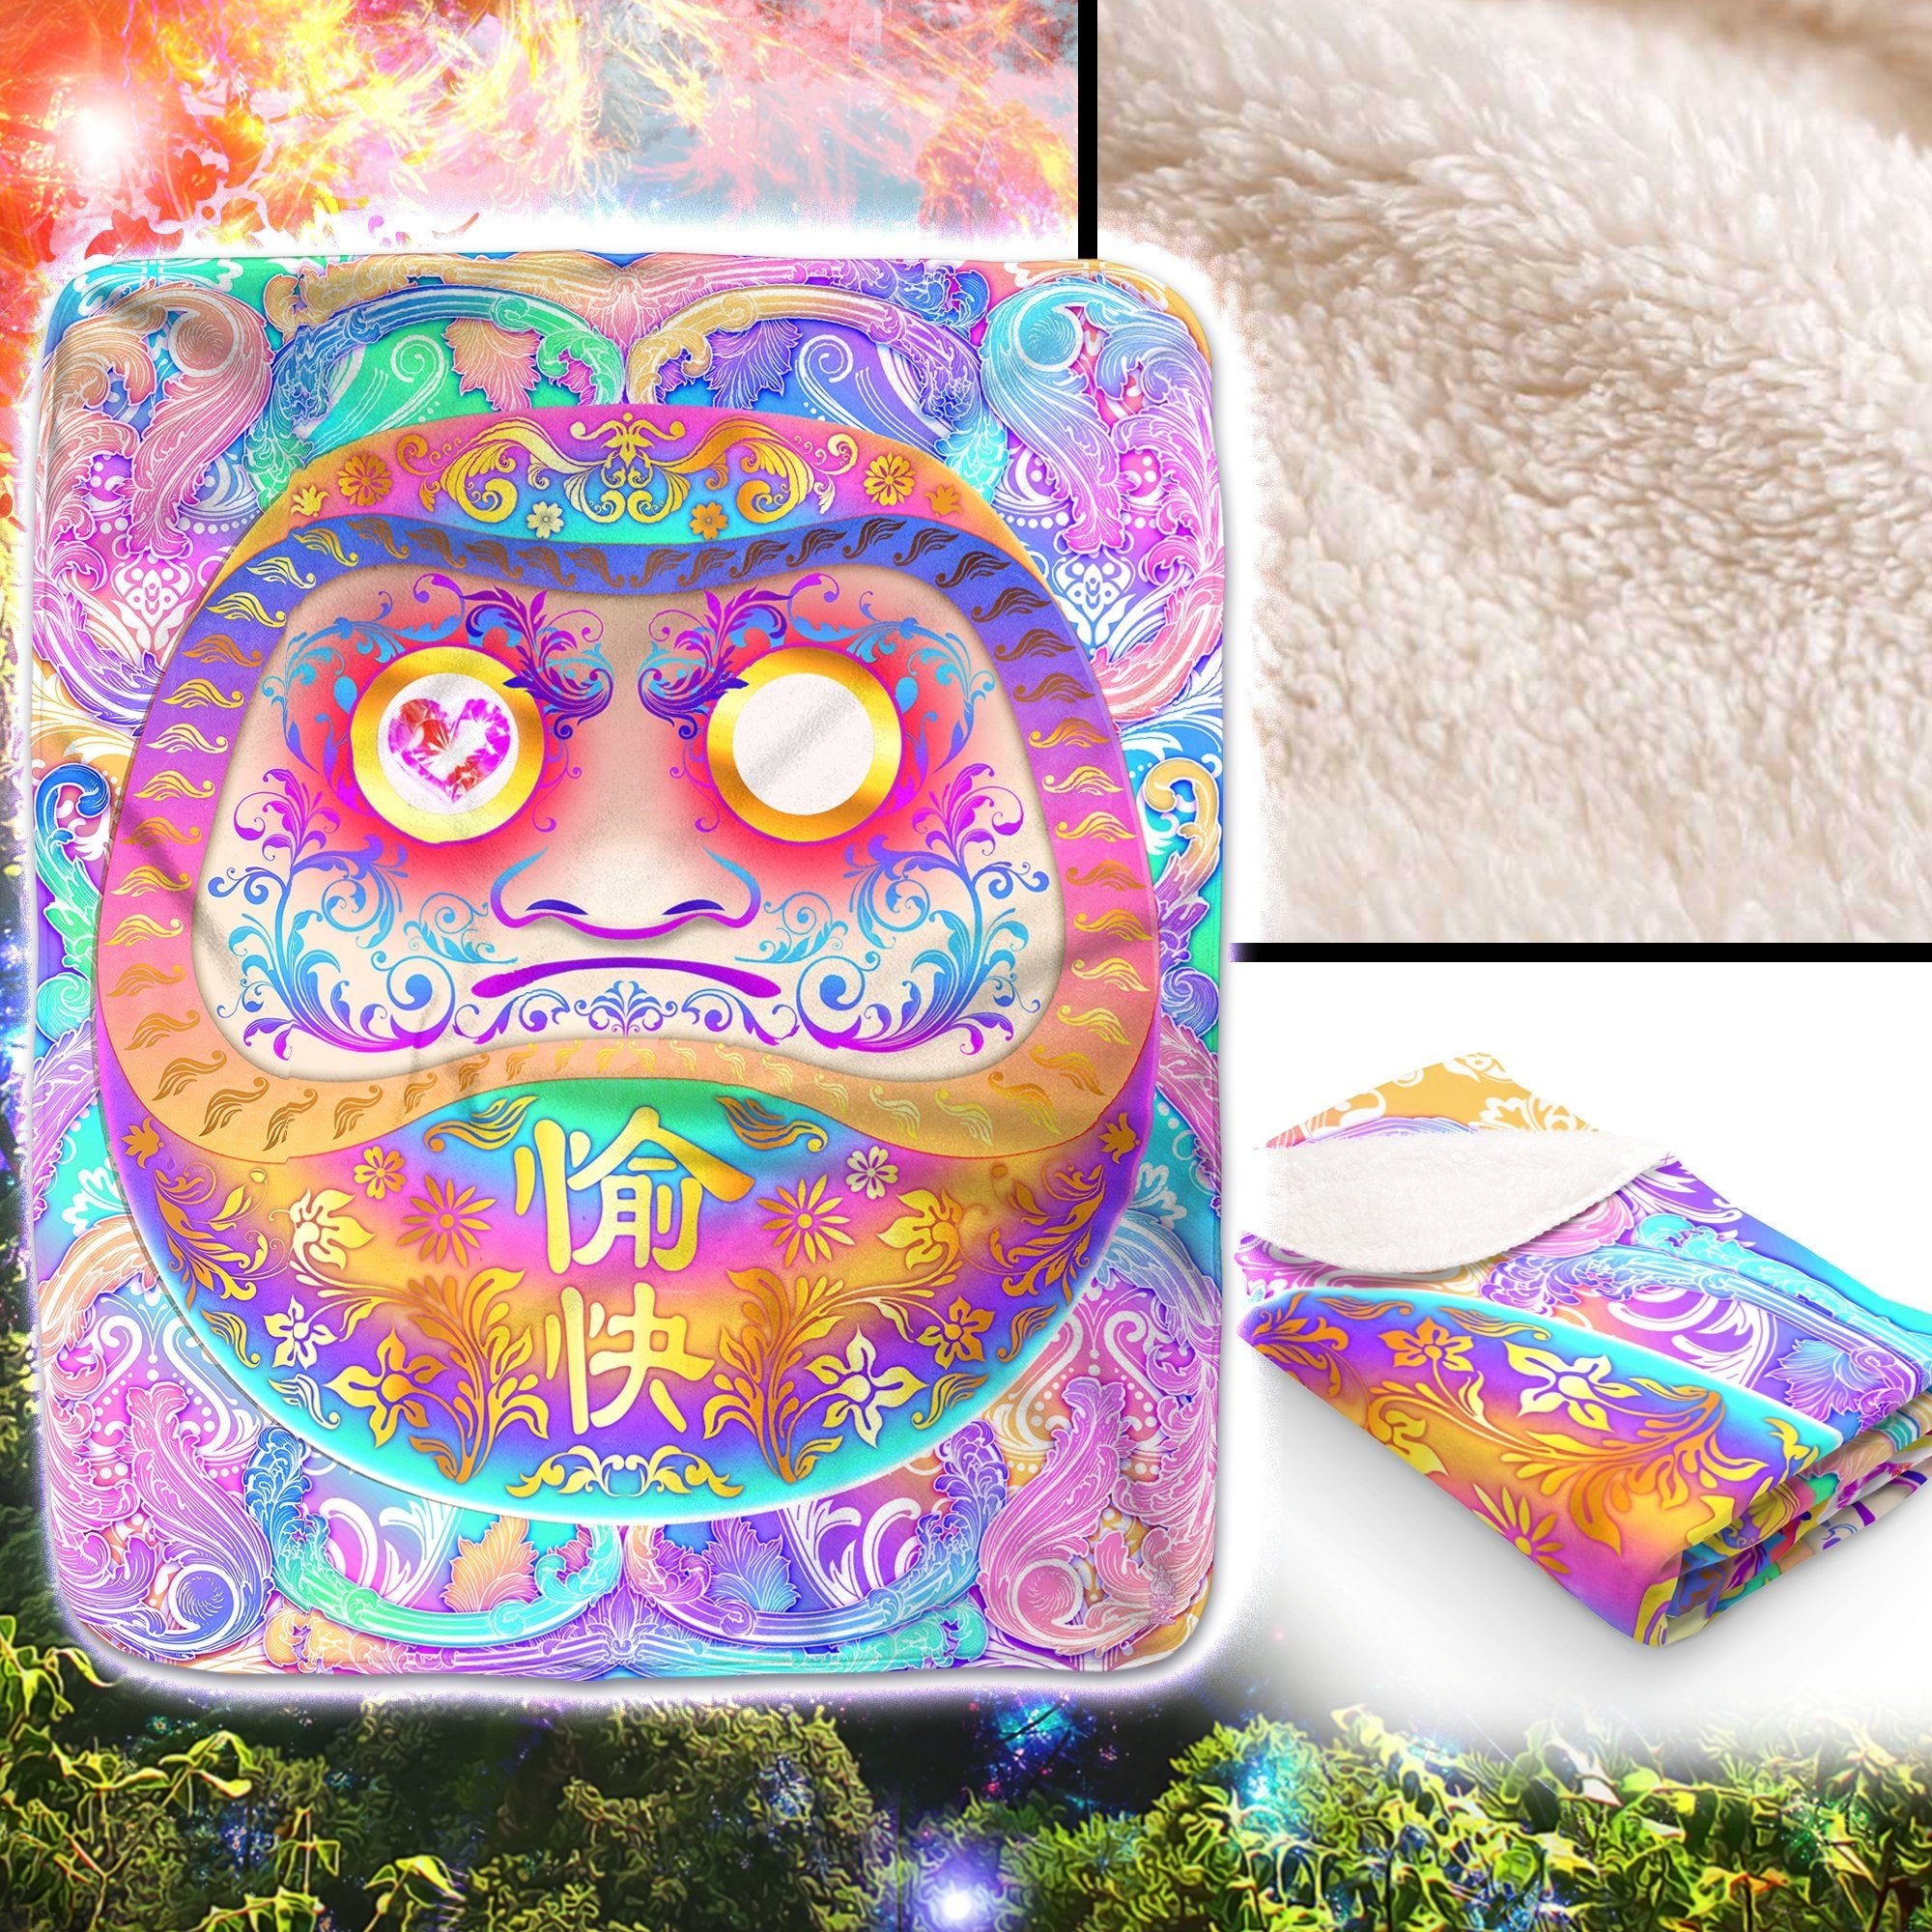 Holographic Throw Fleece Blanket, Aesthetic Room, Japanese Anime and Manga, Psychedelic Decor, Eclectic and Funky Gift - Pastel Daruma, Fairy Kei - Abysm Internal